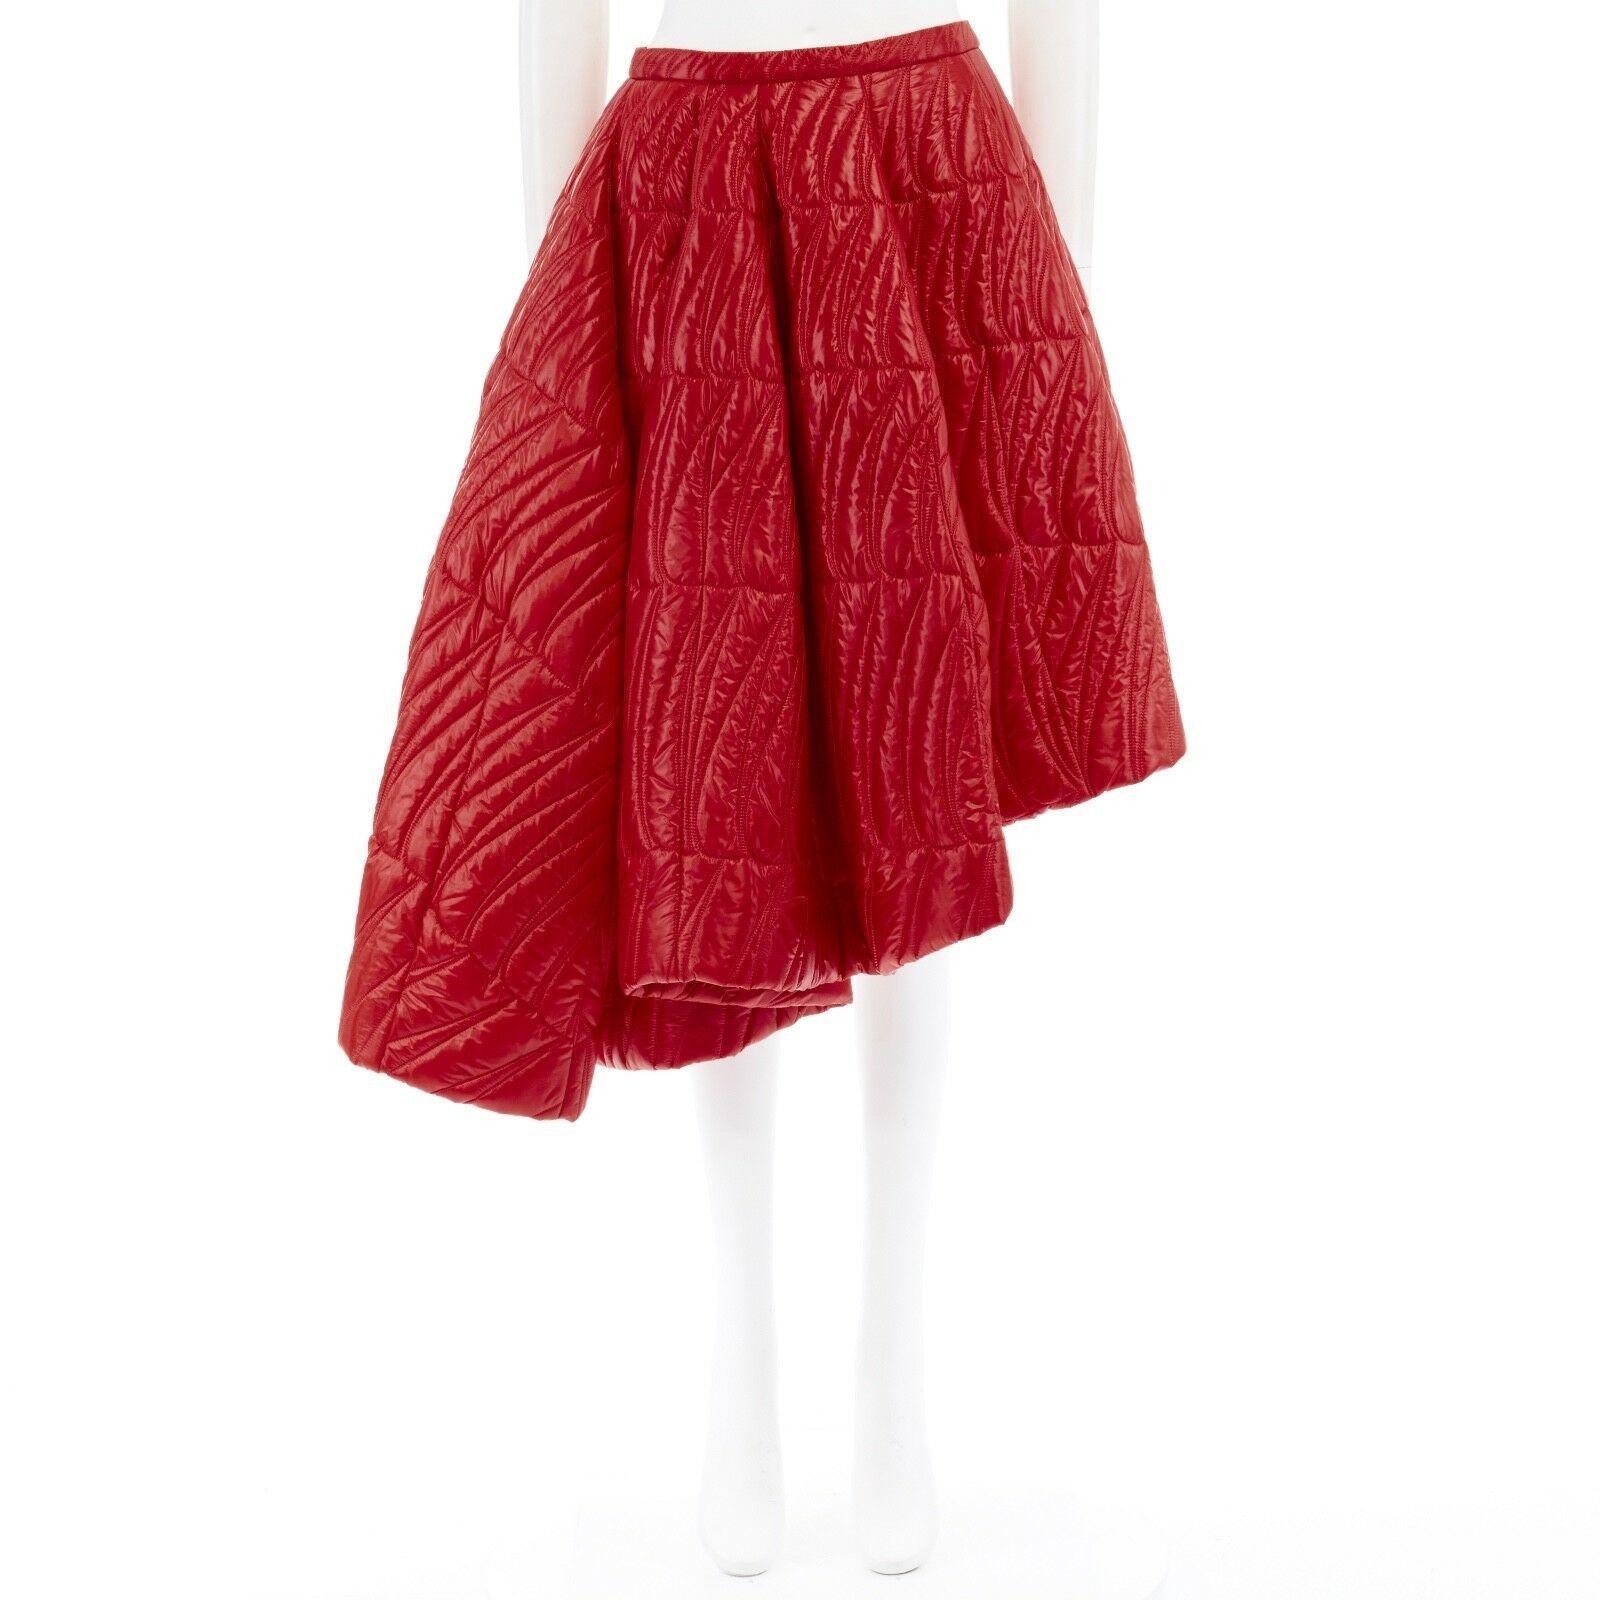 runway CHRISTIAN DIOR RAF SIMONS AW14 red quilted padded asymmetric skirt IT40 S

CHRISTIAN DIOR by RAF SIMONS
FROM THE FALL WINTER 2014 RUNWAY /
CAMPAIGNAS SEEN ON GRACE HARTZEL, MARJORIE HARVEY, SUSIE BUBBLE
Red nylon . Quilted padded skirt .